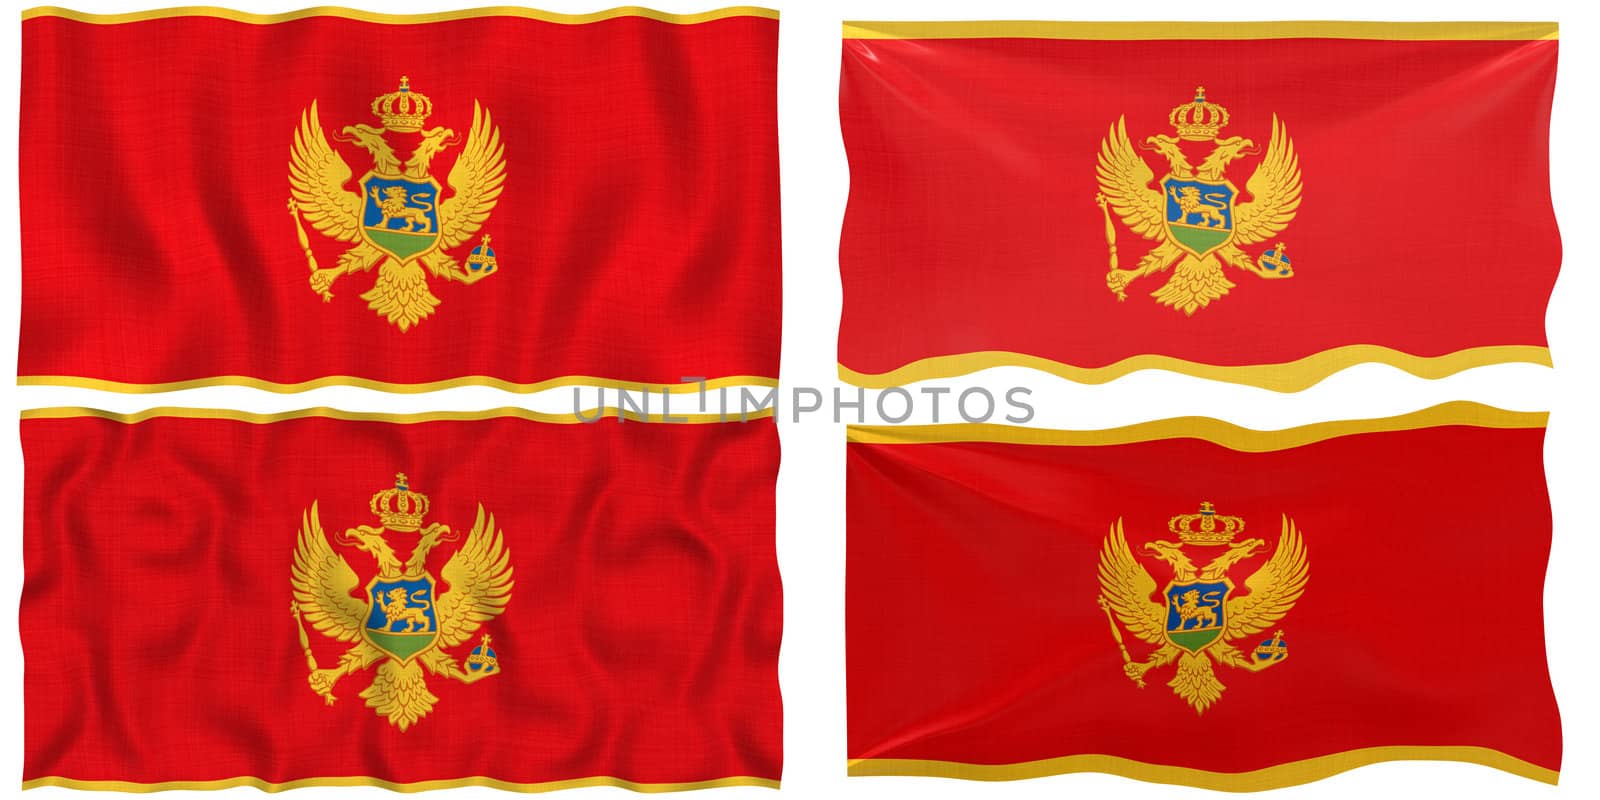 Great Image of the Flag of Montenegro